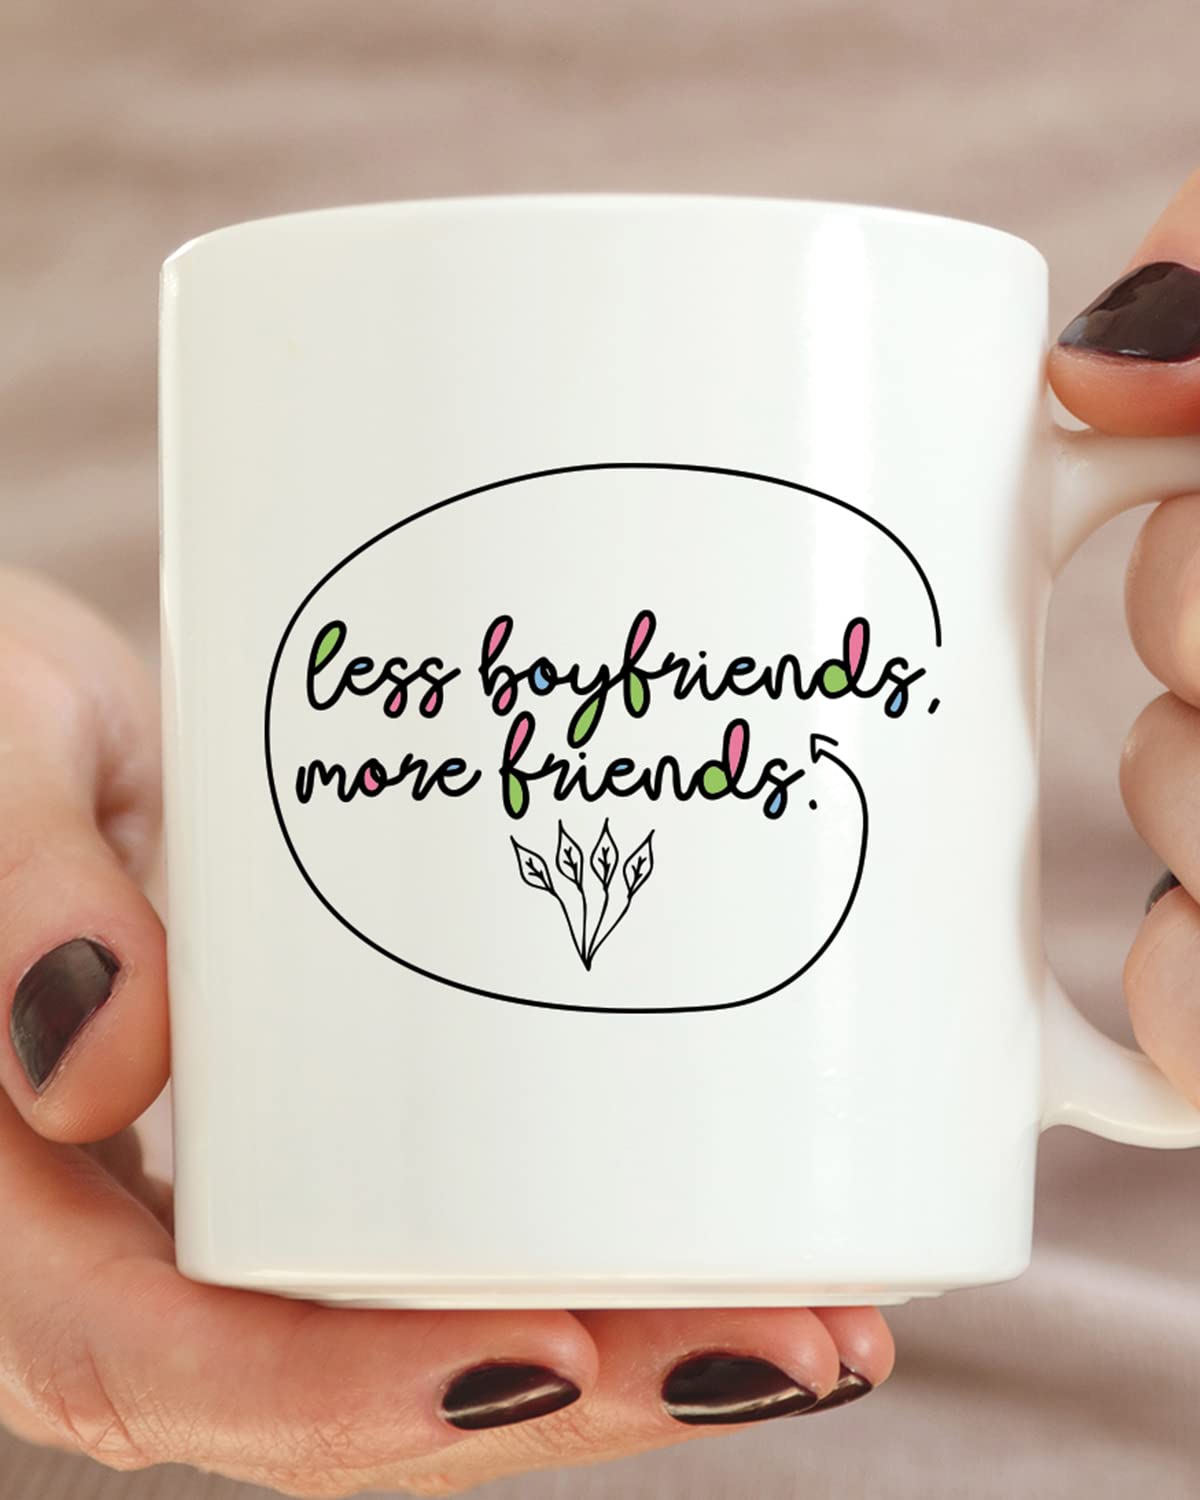 Less Boyfriends, More Friends Coffee Mug - Birthday Gift, Motivational Mug, Printed with Inspiring Quotes, Inspirational Gift for Him & Her, Best Friend Gifts for Her, Cheer Up Gift